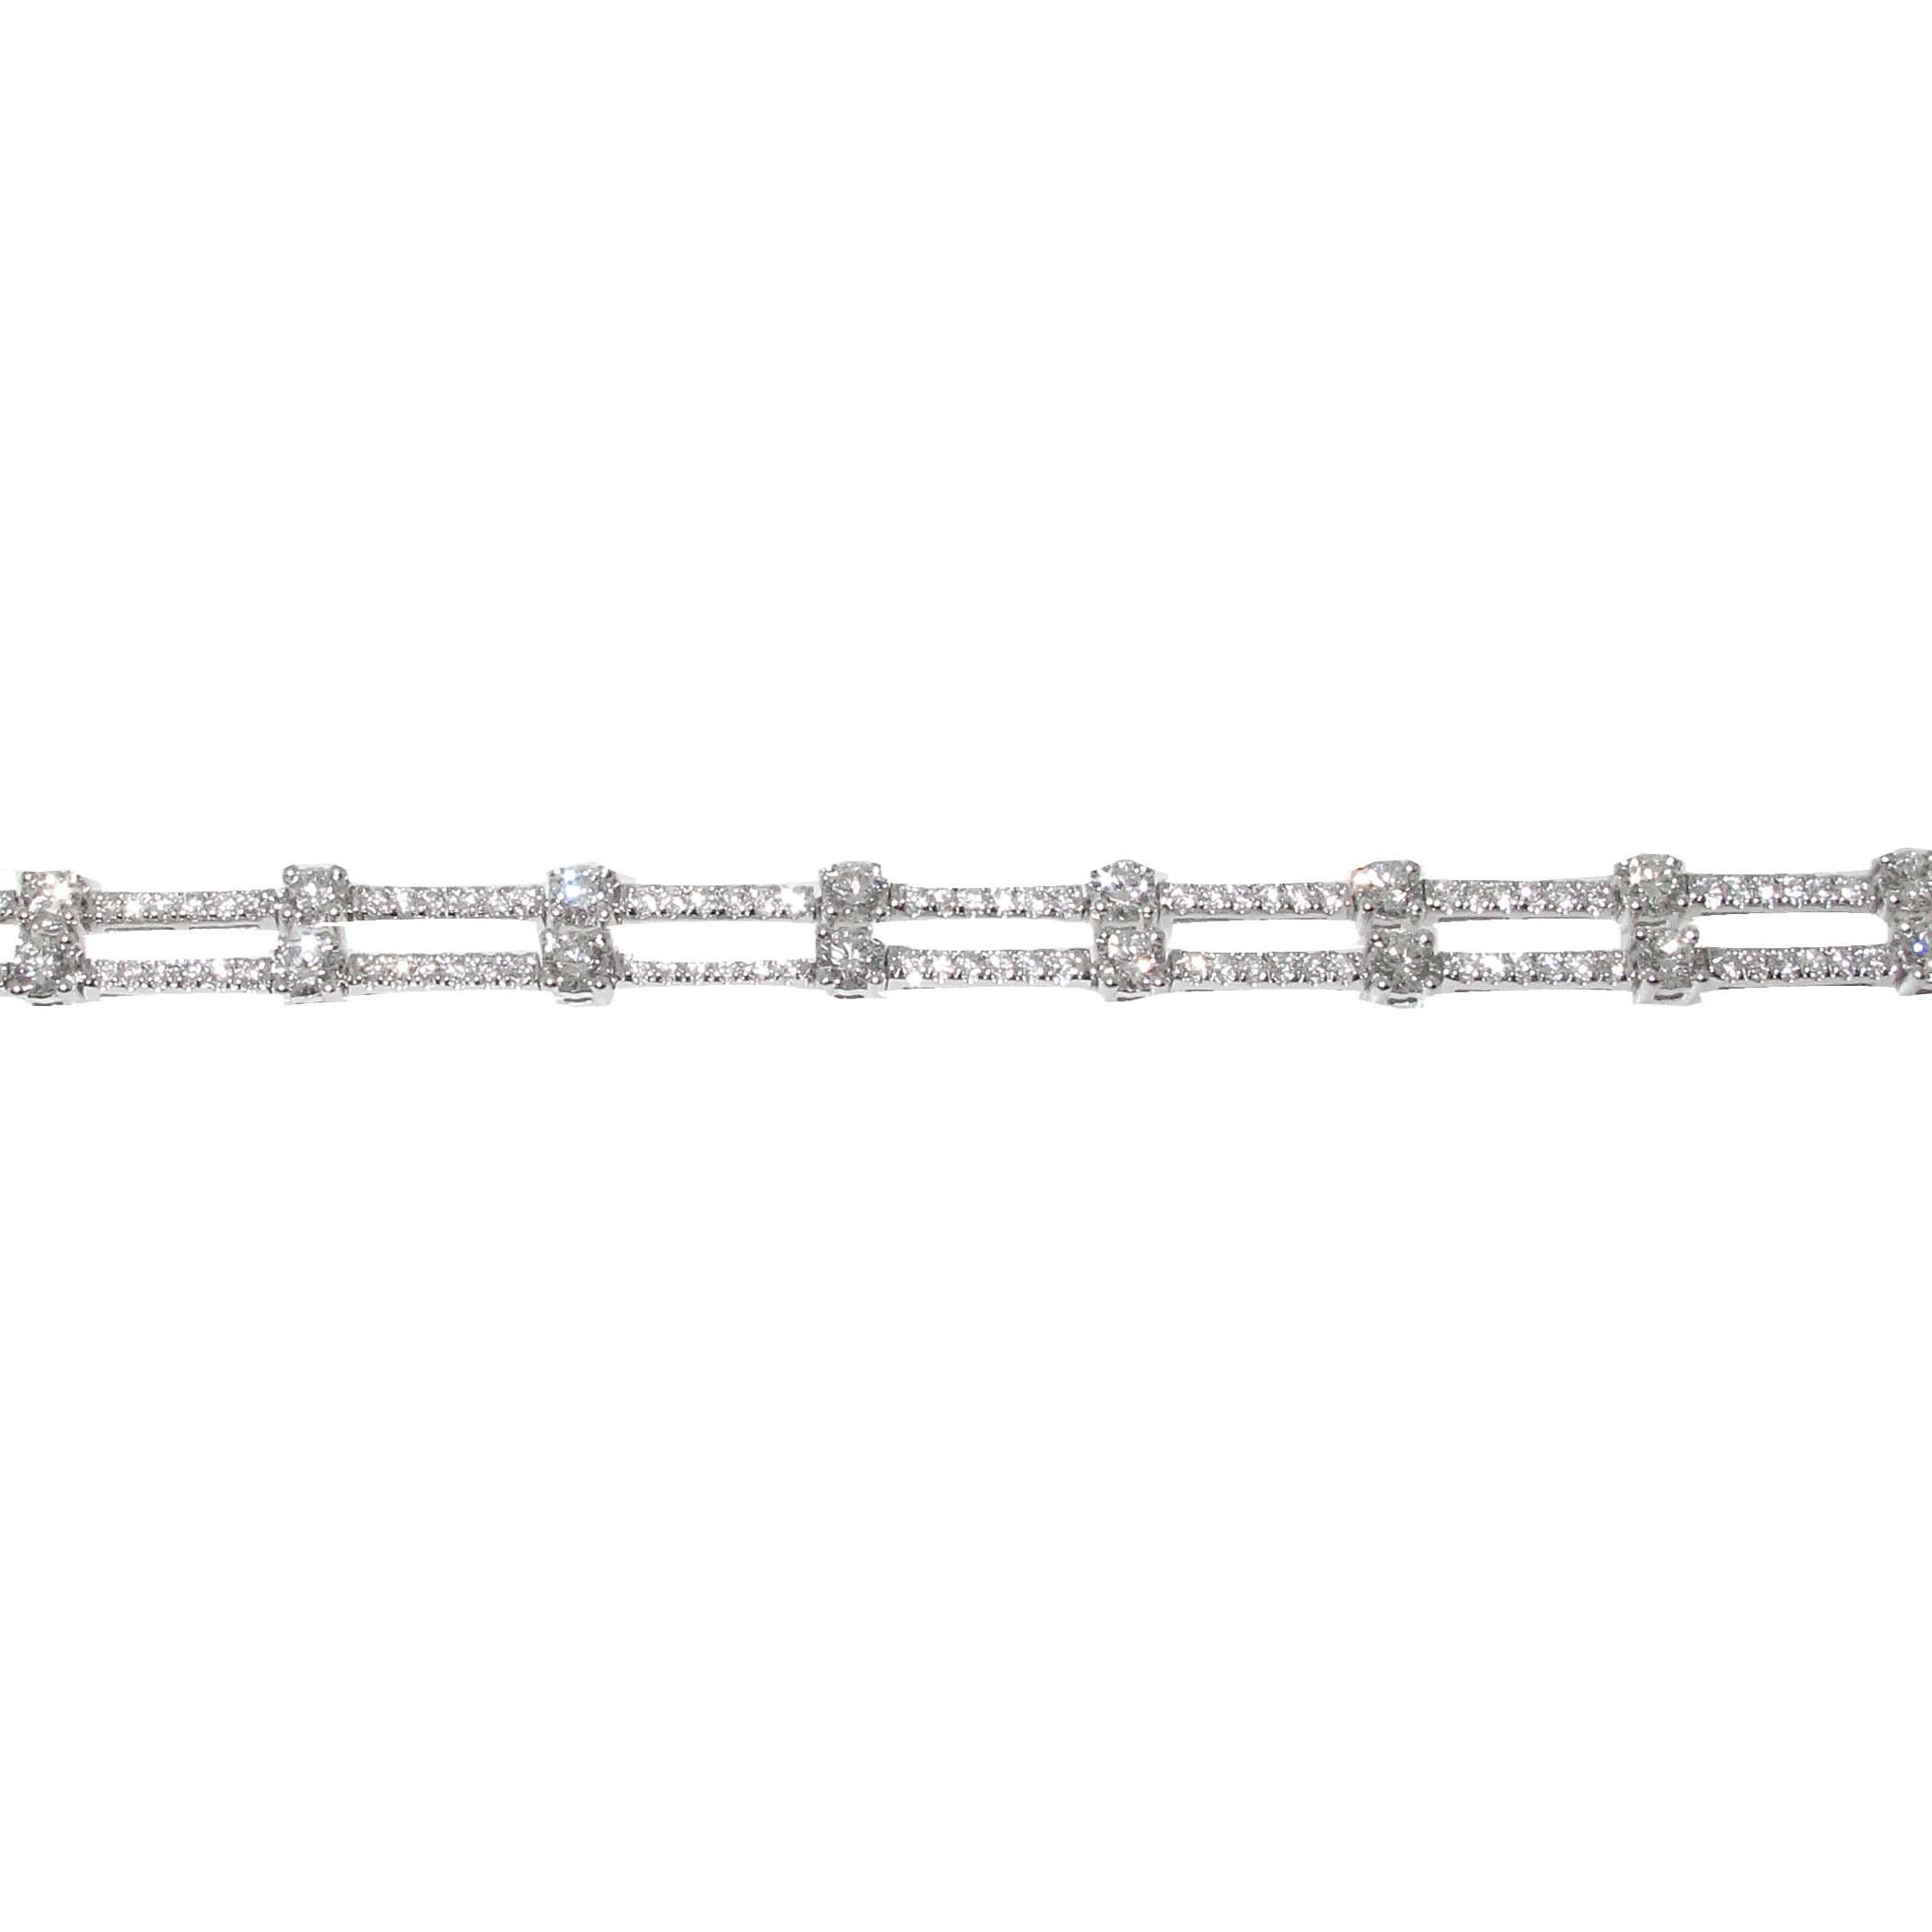 Gorgeous double row diamond bracelet. Each row of diamonds moves independently of the other making this a very special piece. It has a known weight of 3.61 carats of fine white diamonds and is set in 18kt white gold. The shine on this bracelet is